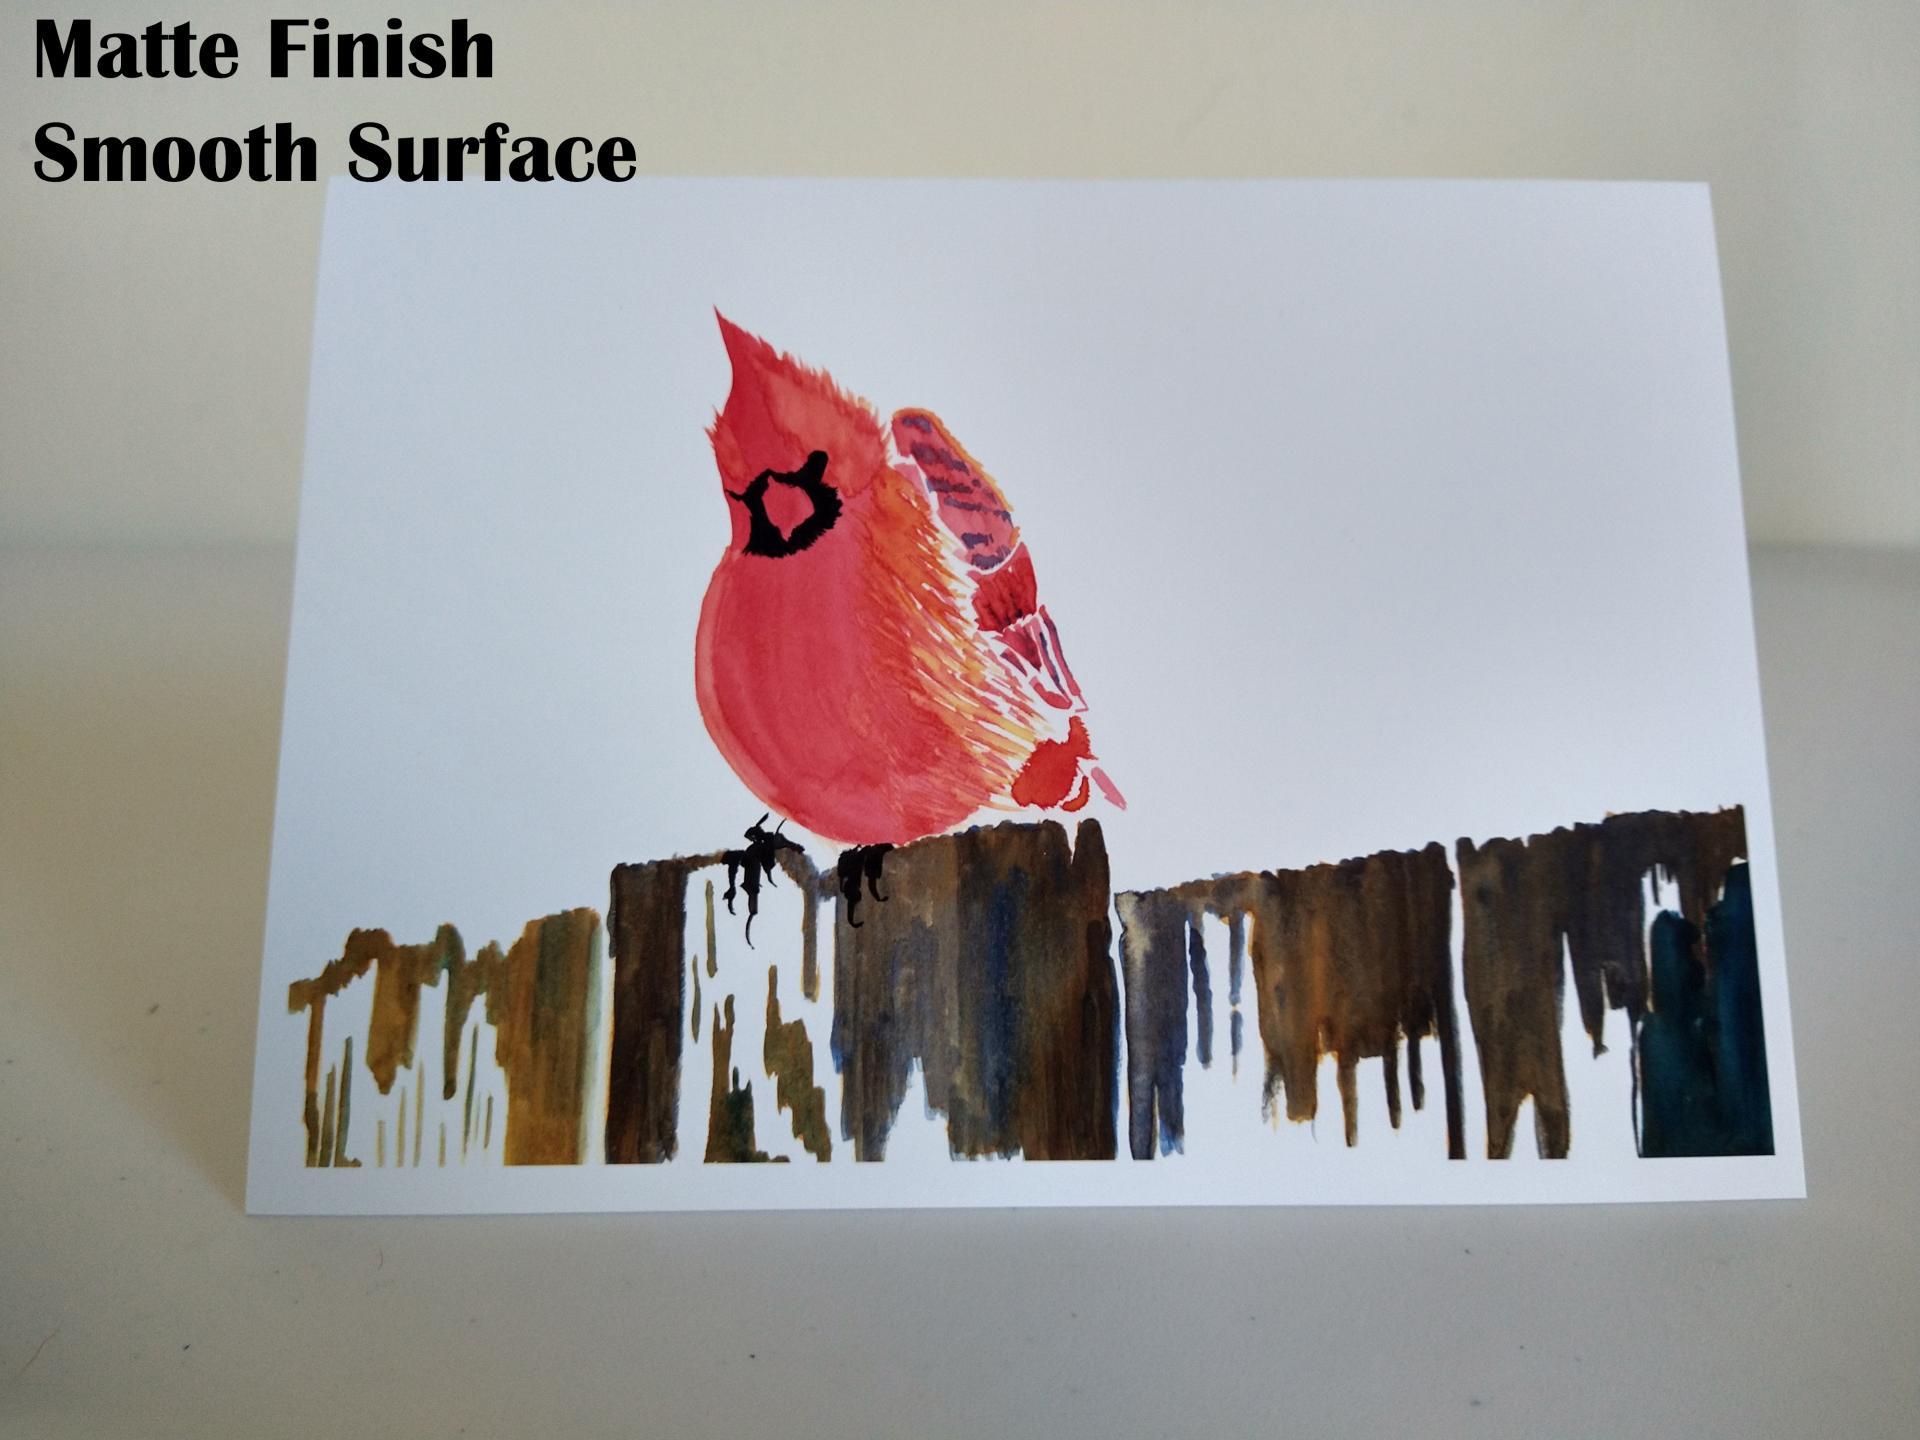 Cardinal 5x7 Blank Note/Greeting Cards from Original Watercolor Art, w/ Envelopes and Personalization